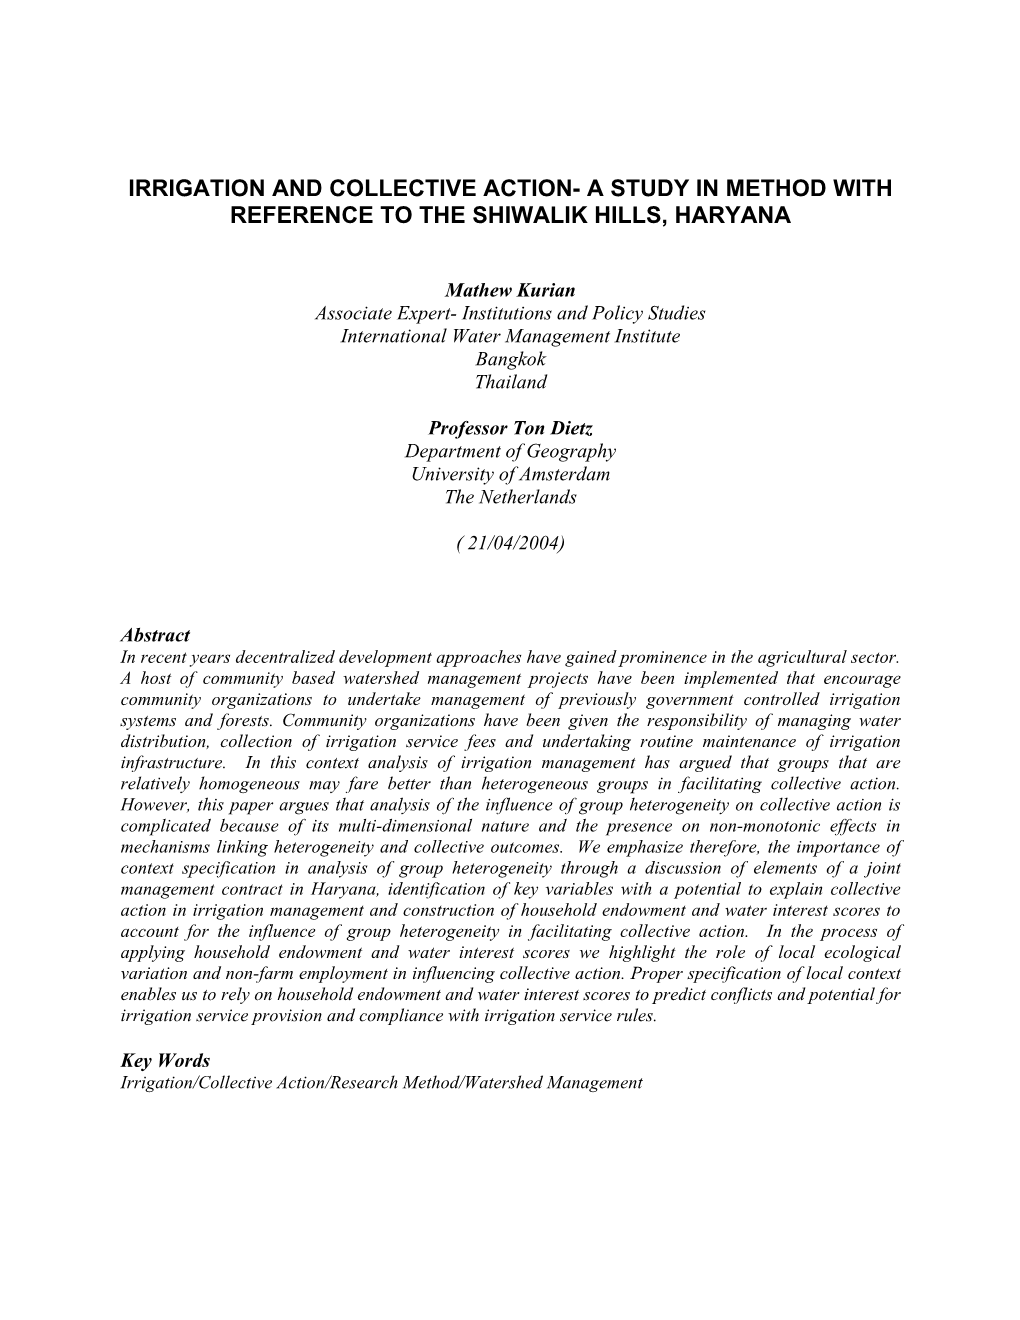 Irrigation and Collective Action- a Study in Method with Reference to the Shiwalik Hills, Haryana